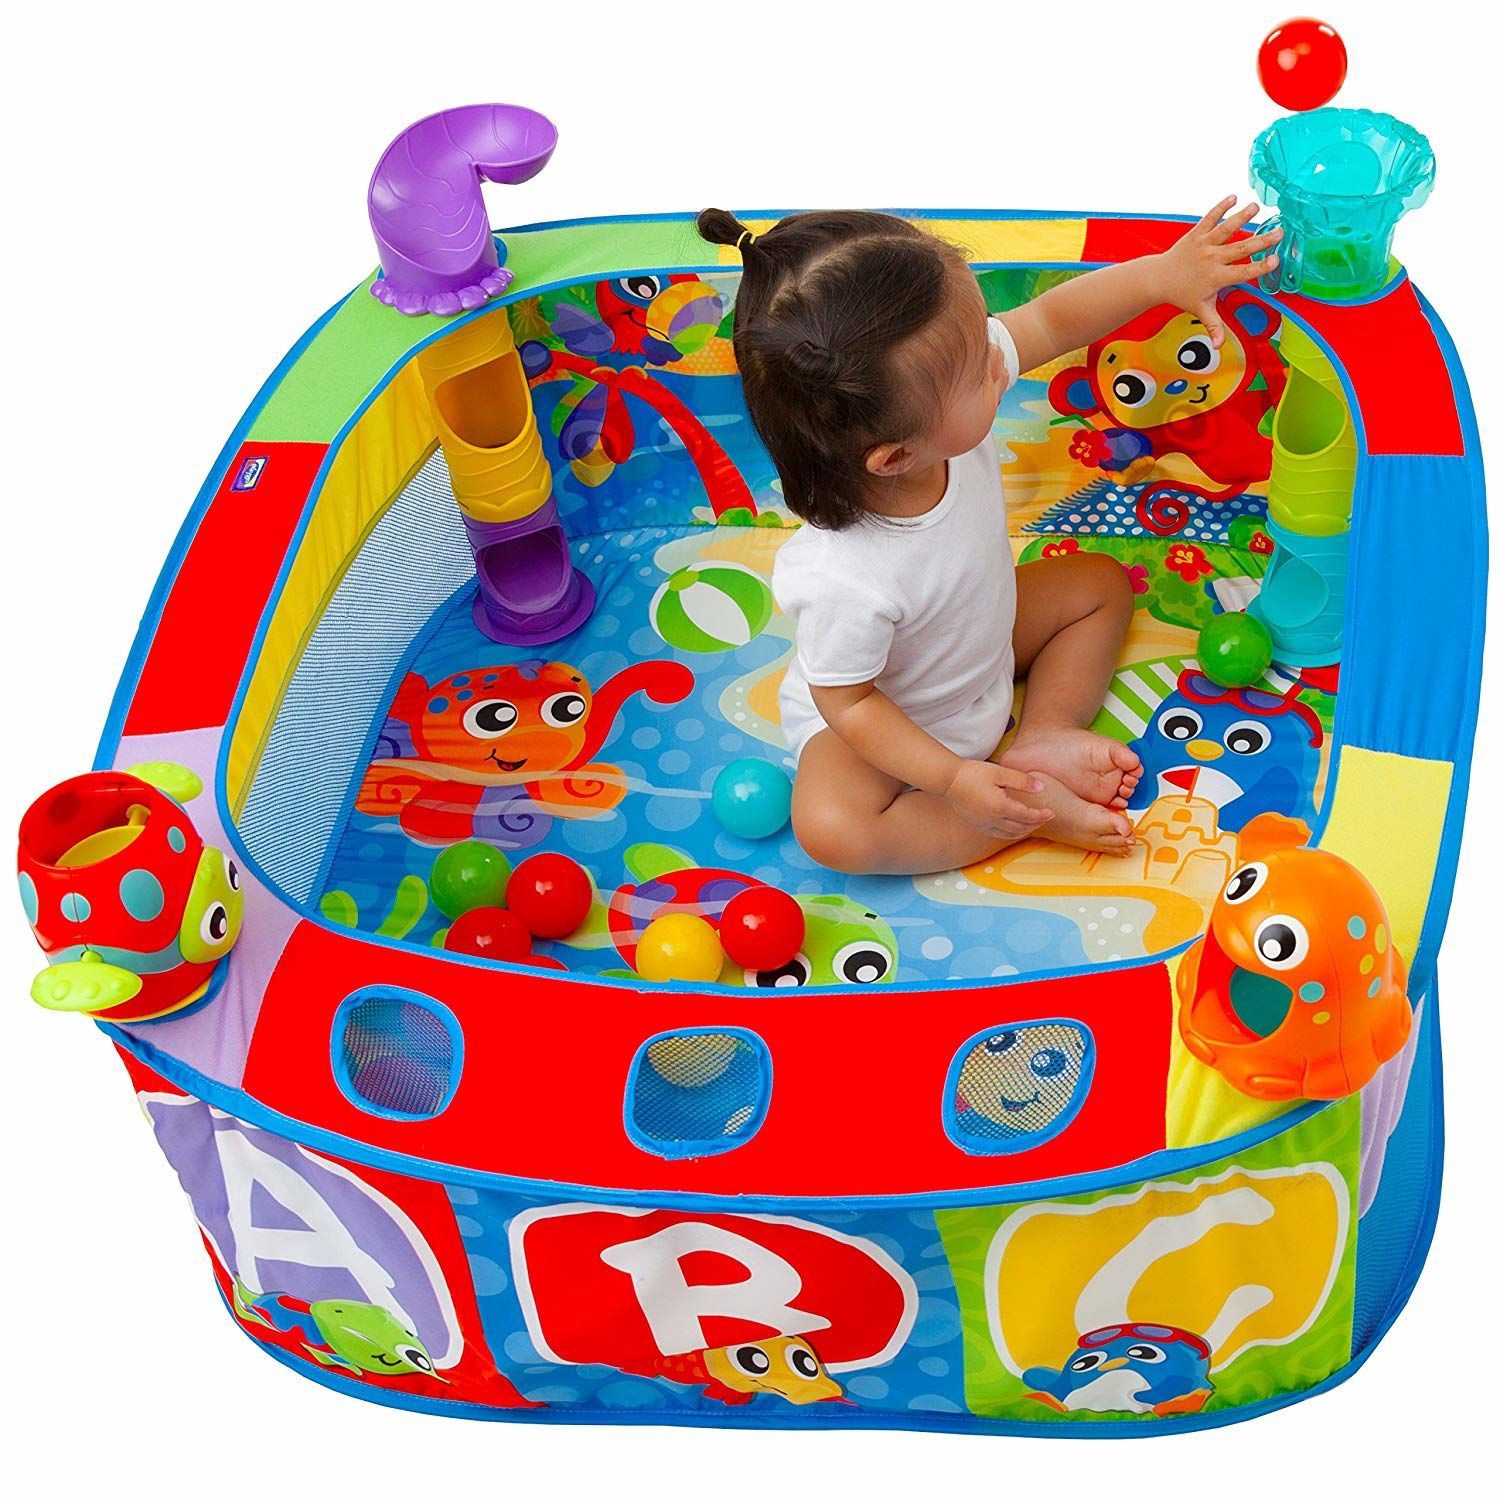 playgro pop and drop ball activity gym